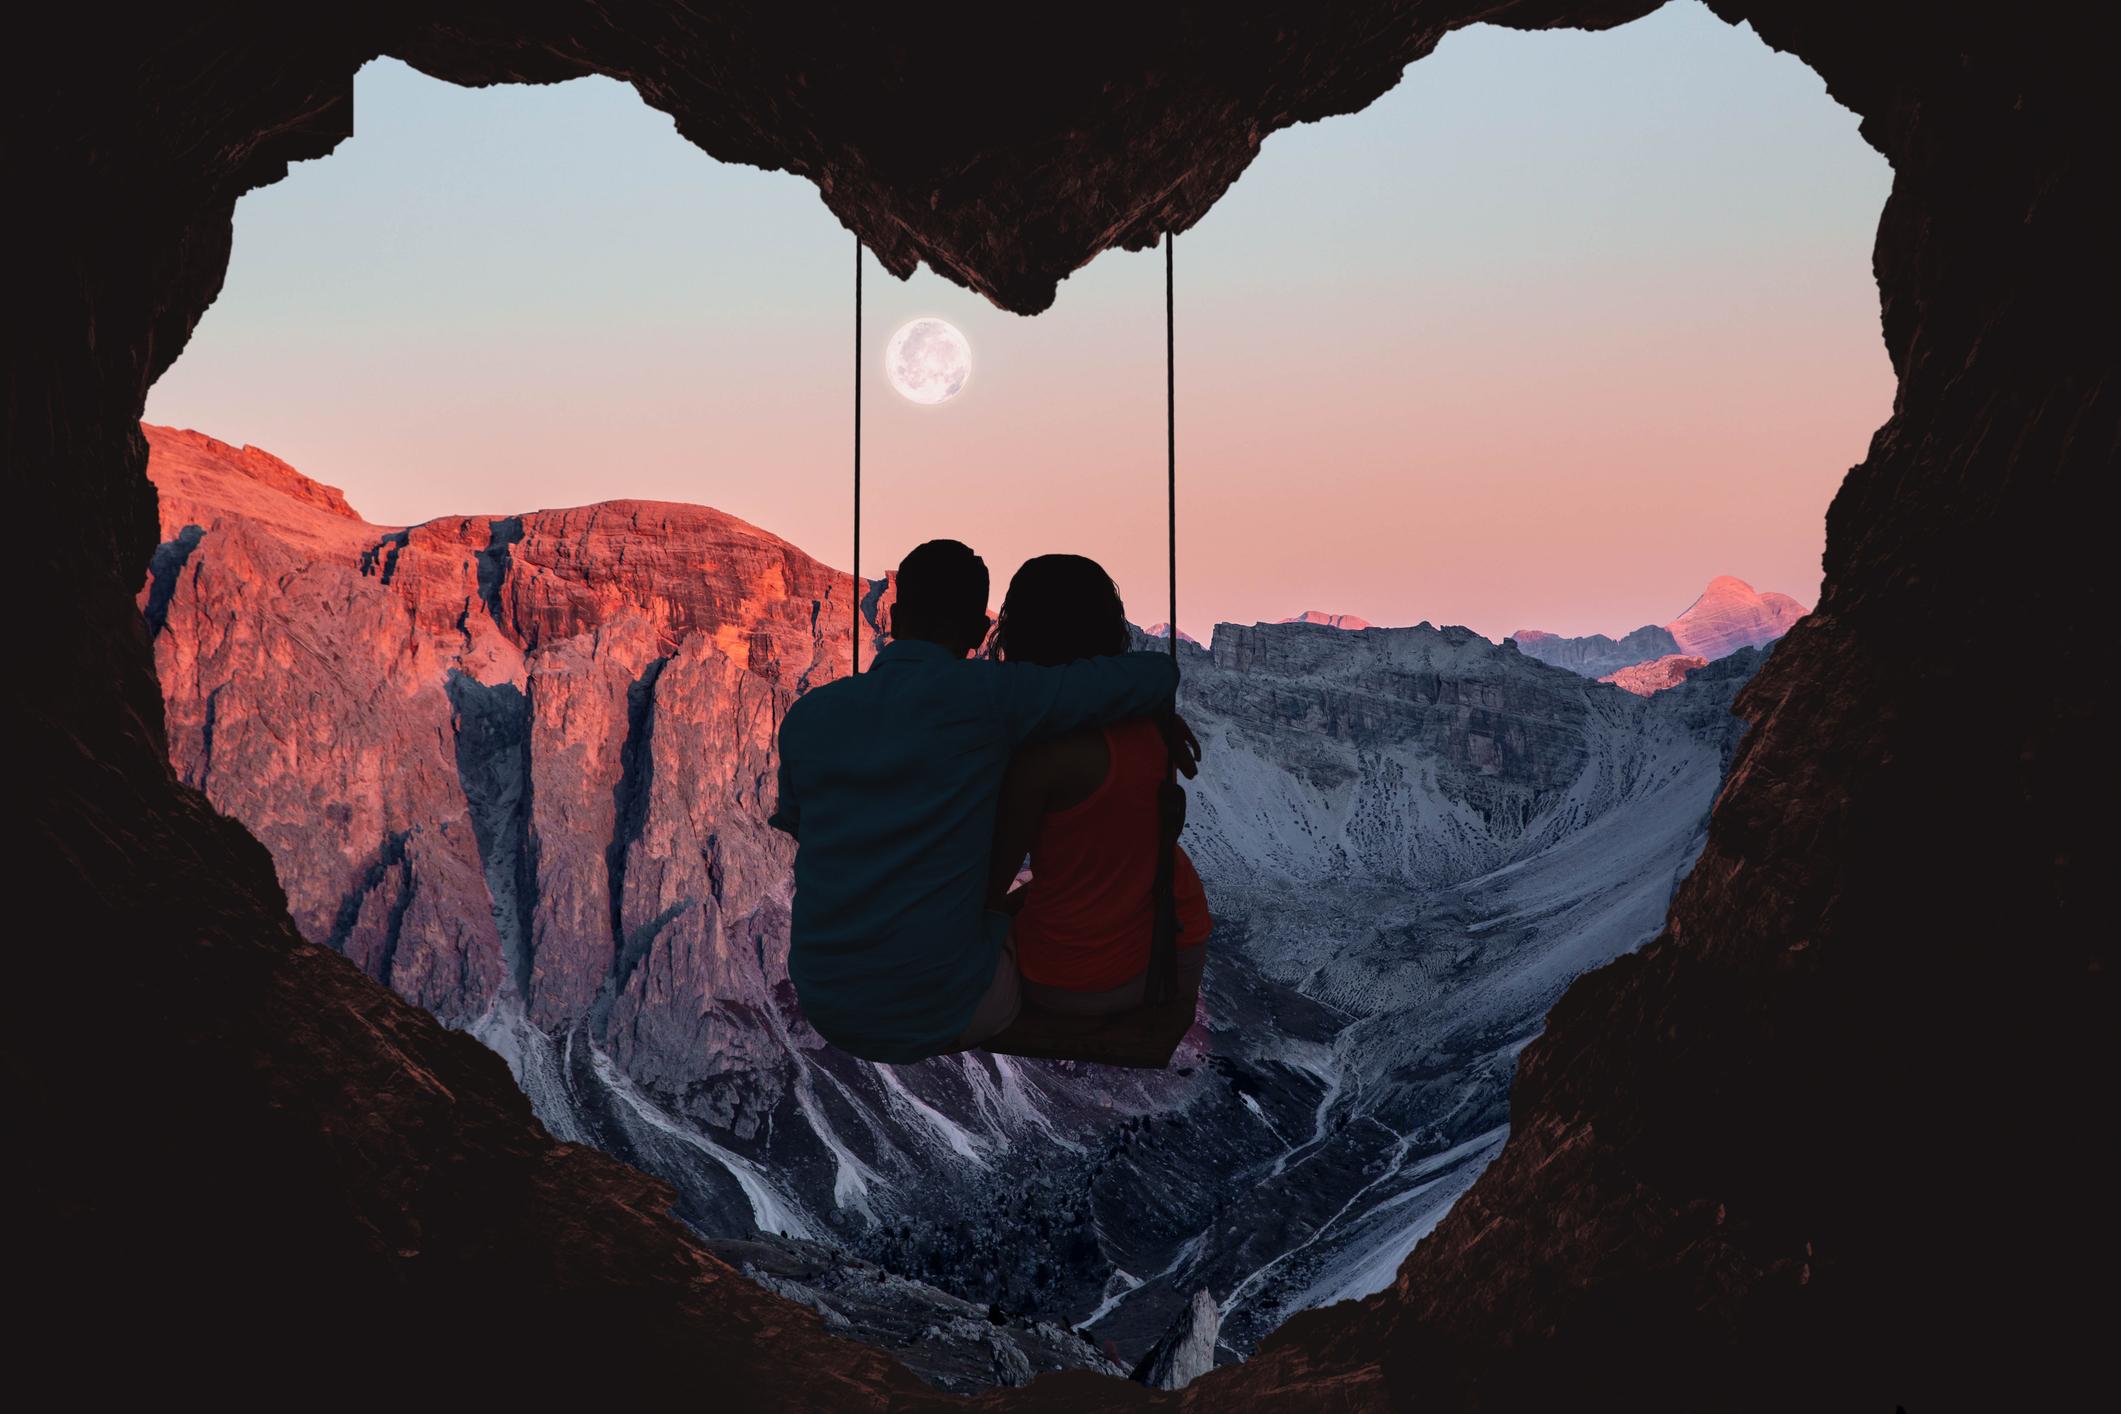  Couple on swing contemplating the mountains in a romantic view with heart shape 